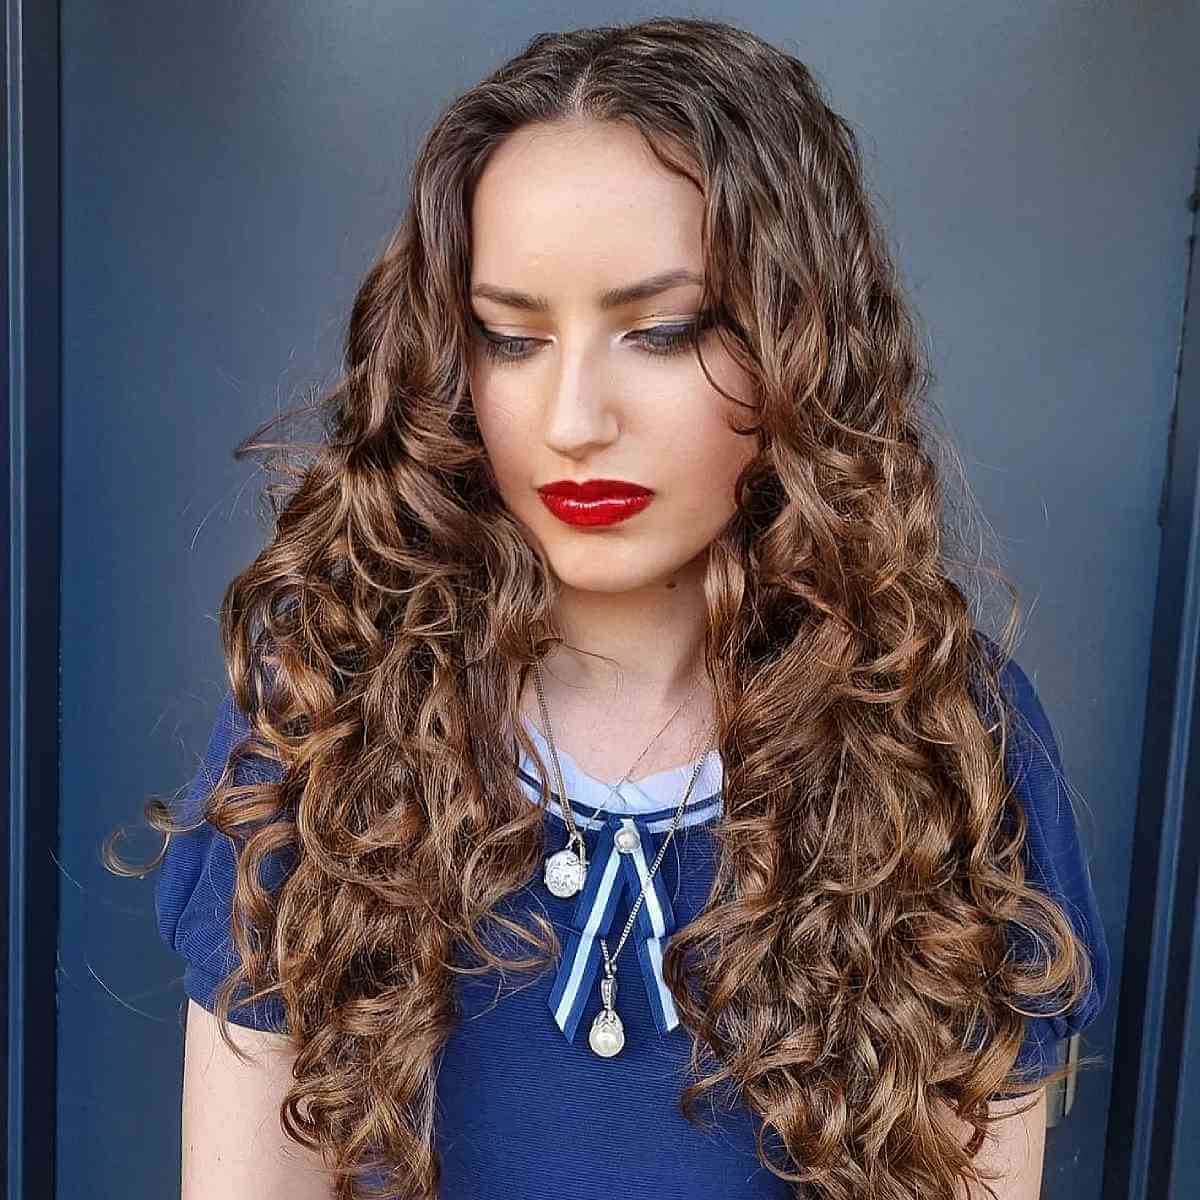 Naturally curly hair with center part for long face shapes